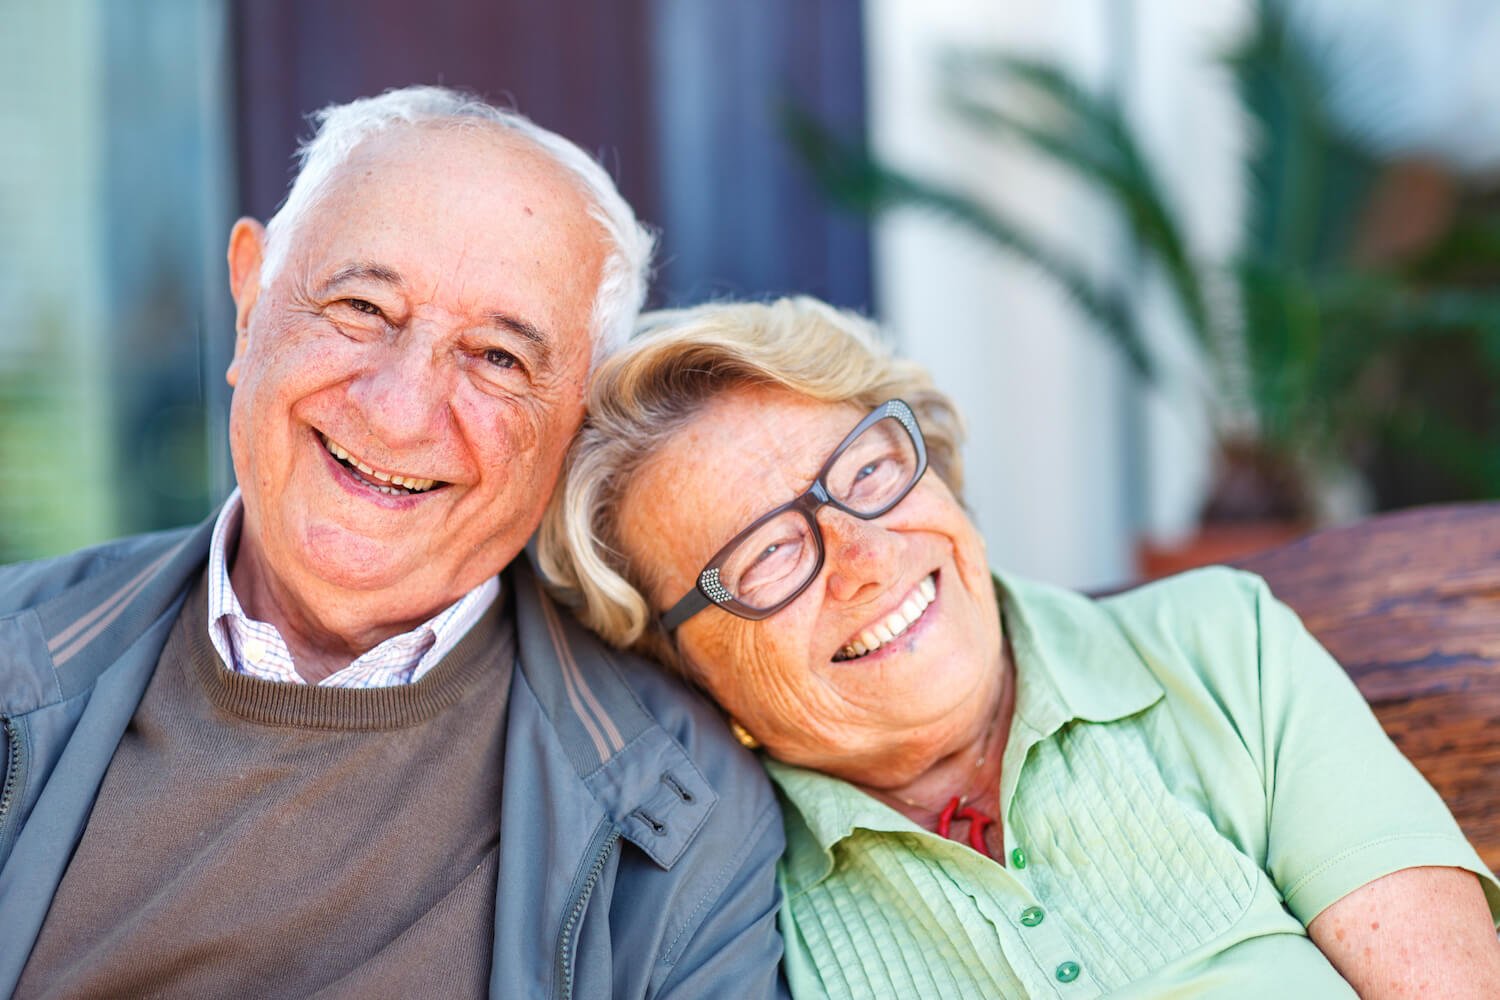 A happy senior couple, the woman leaning her head on the man's shoulder as they smile at the camera